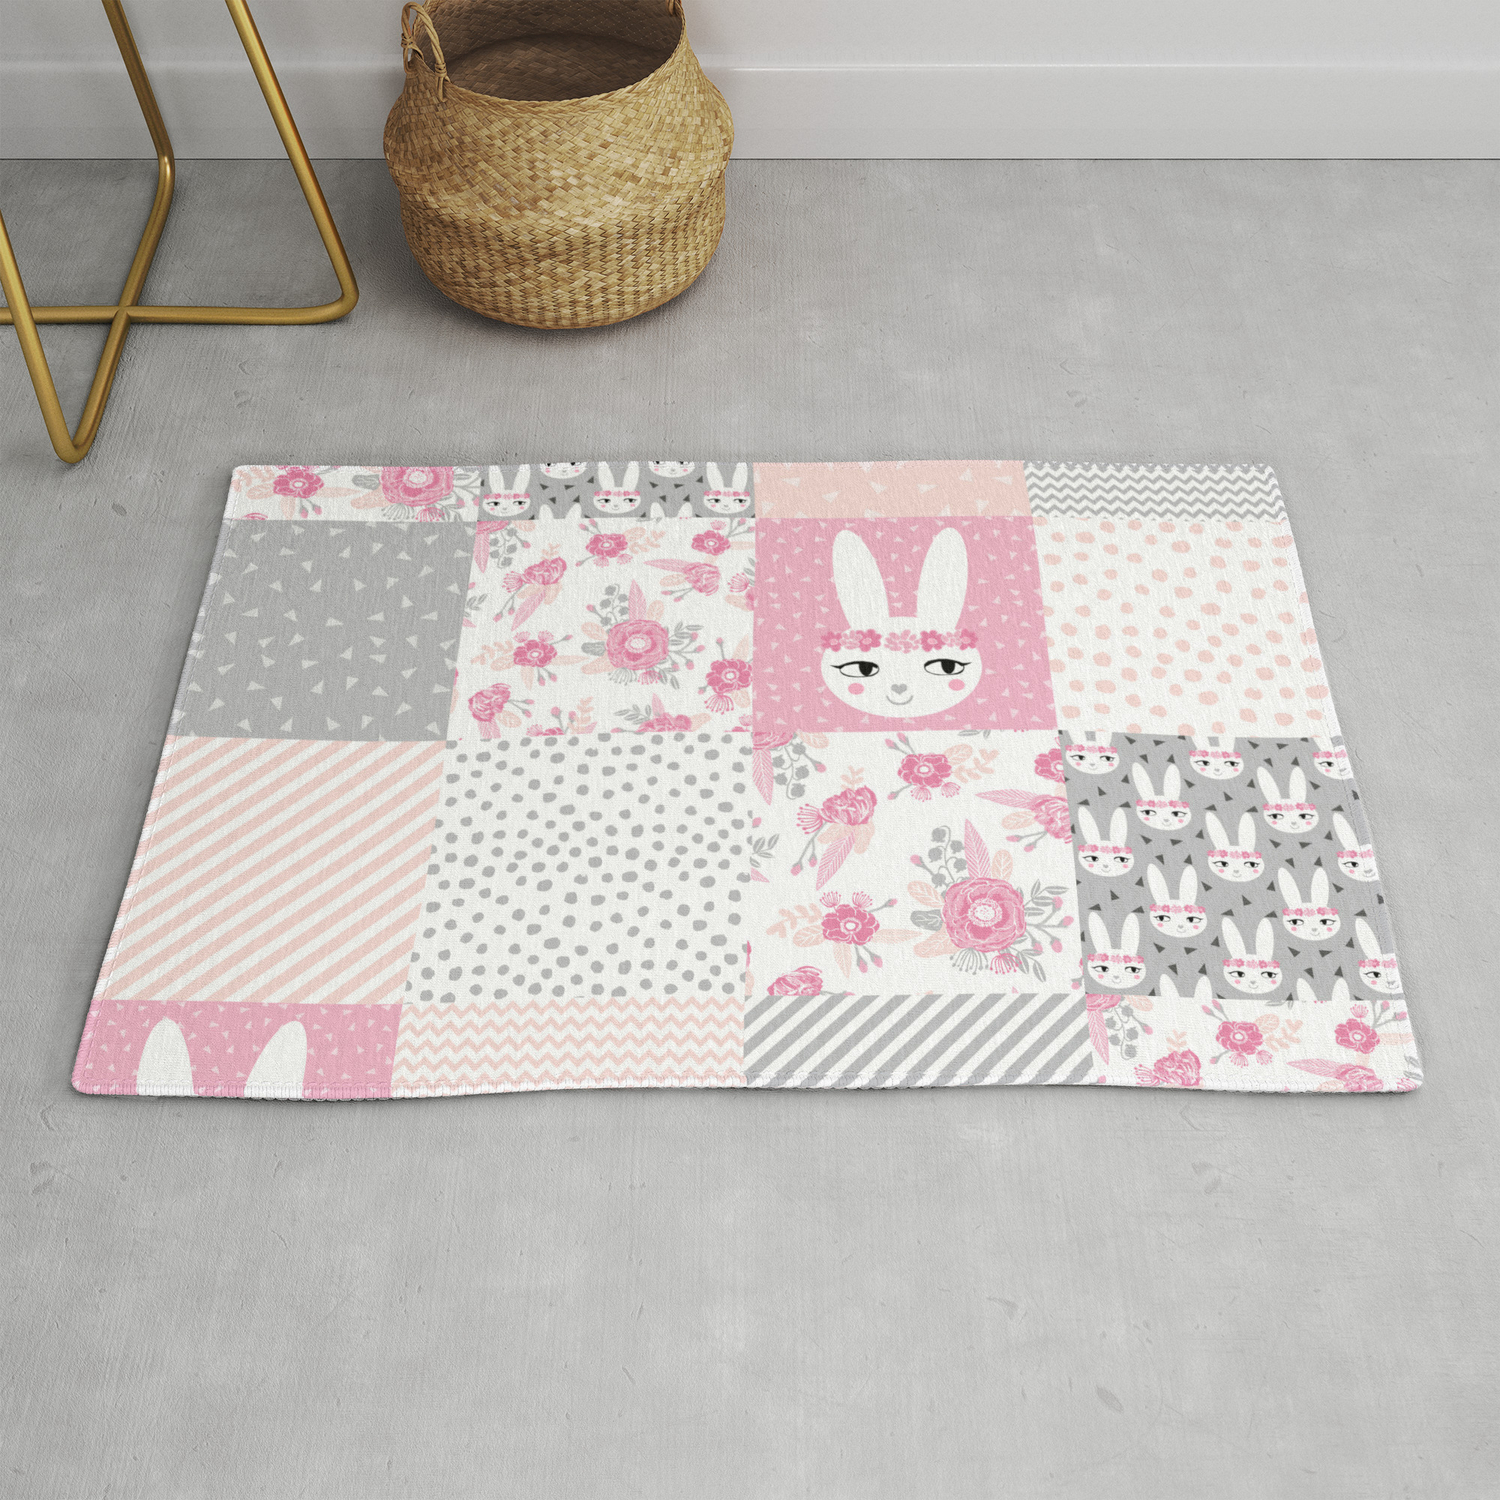 Bunny Quilt Baby Decor Newborn Nursery, Pink And Gray Rugs For Nursery